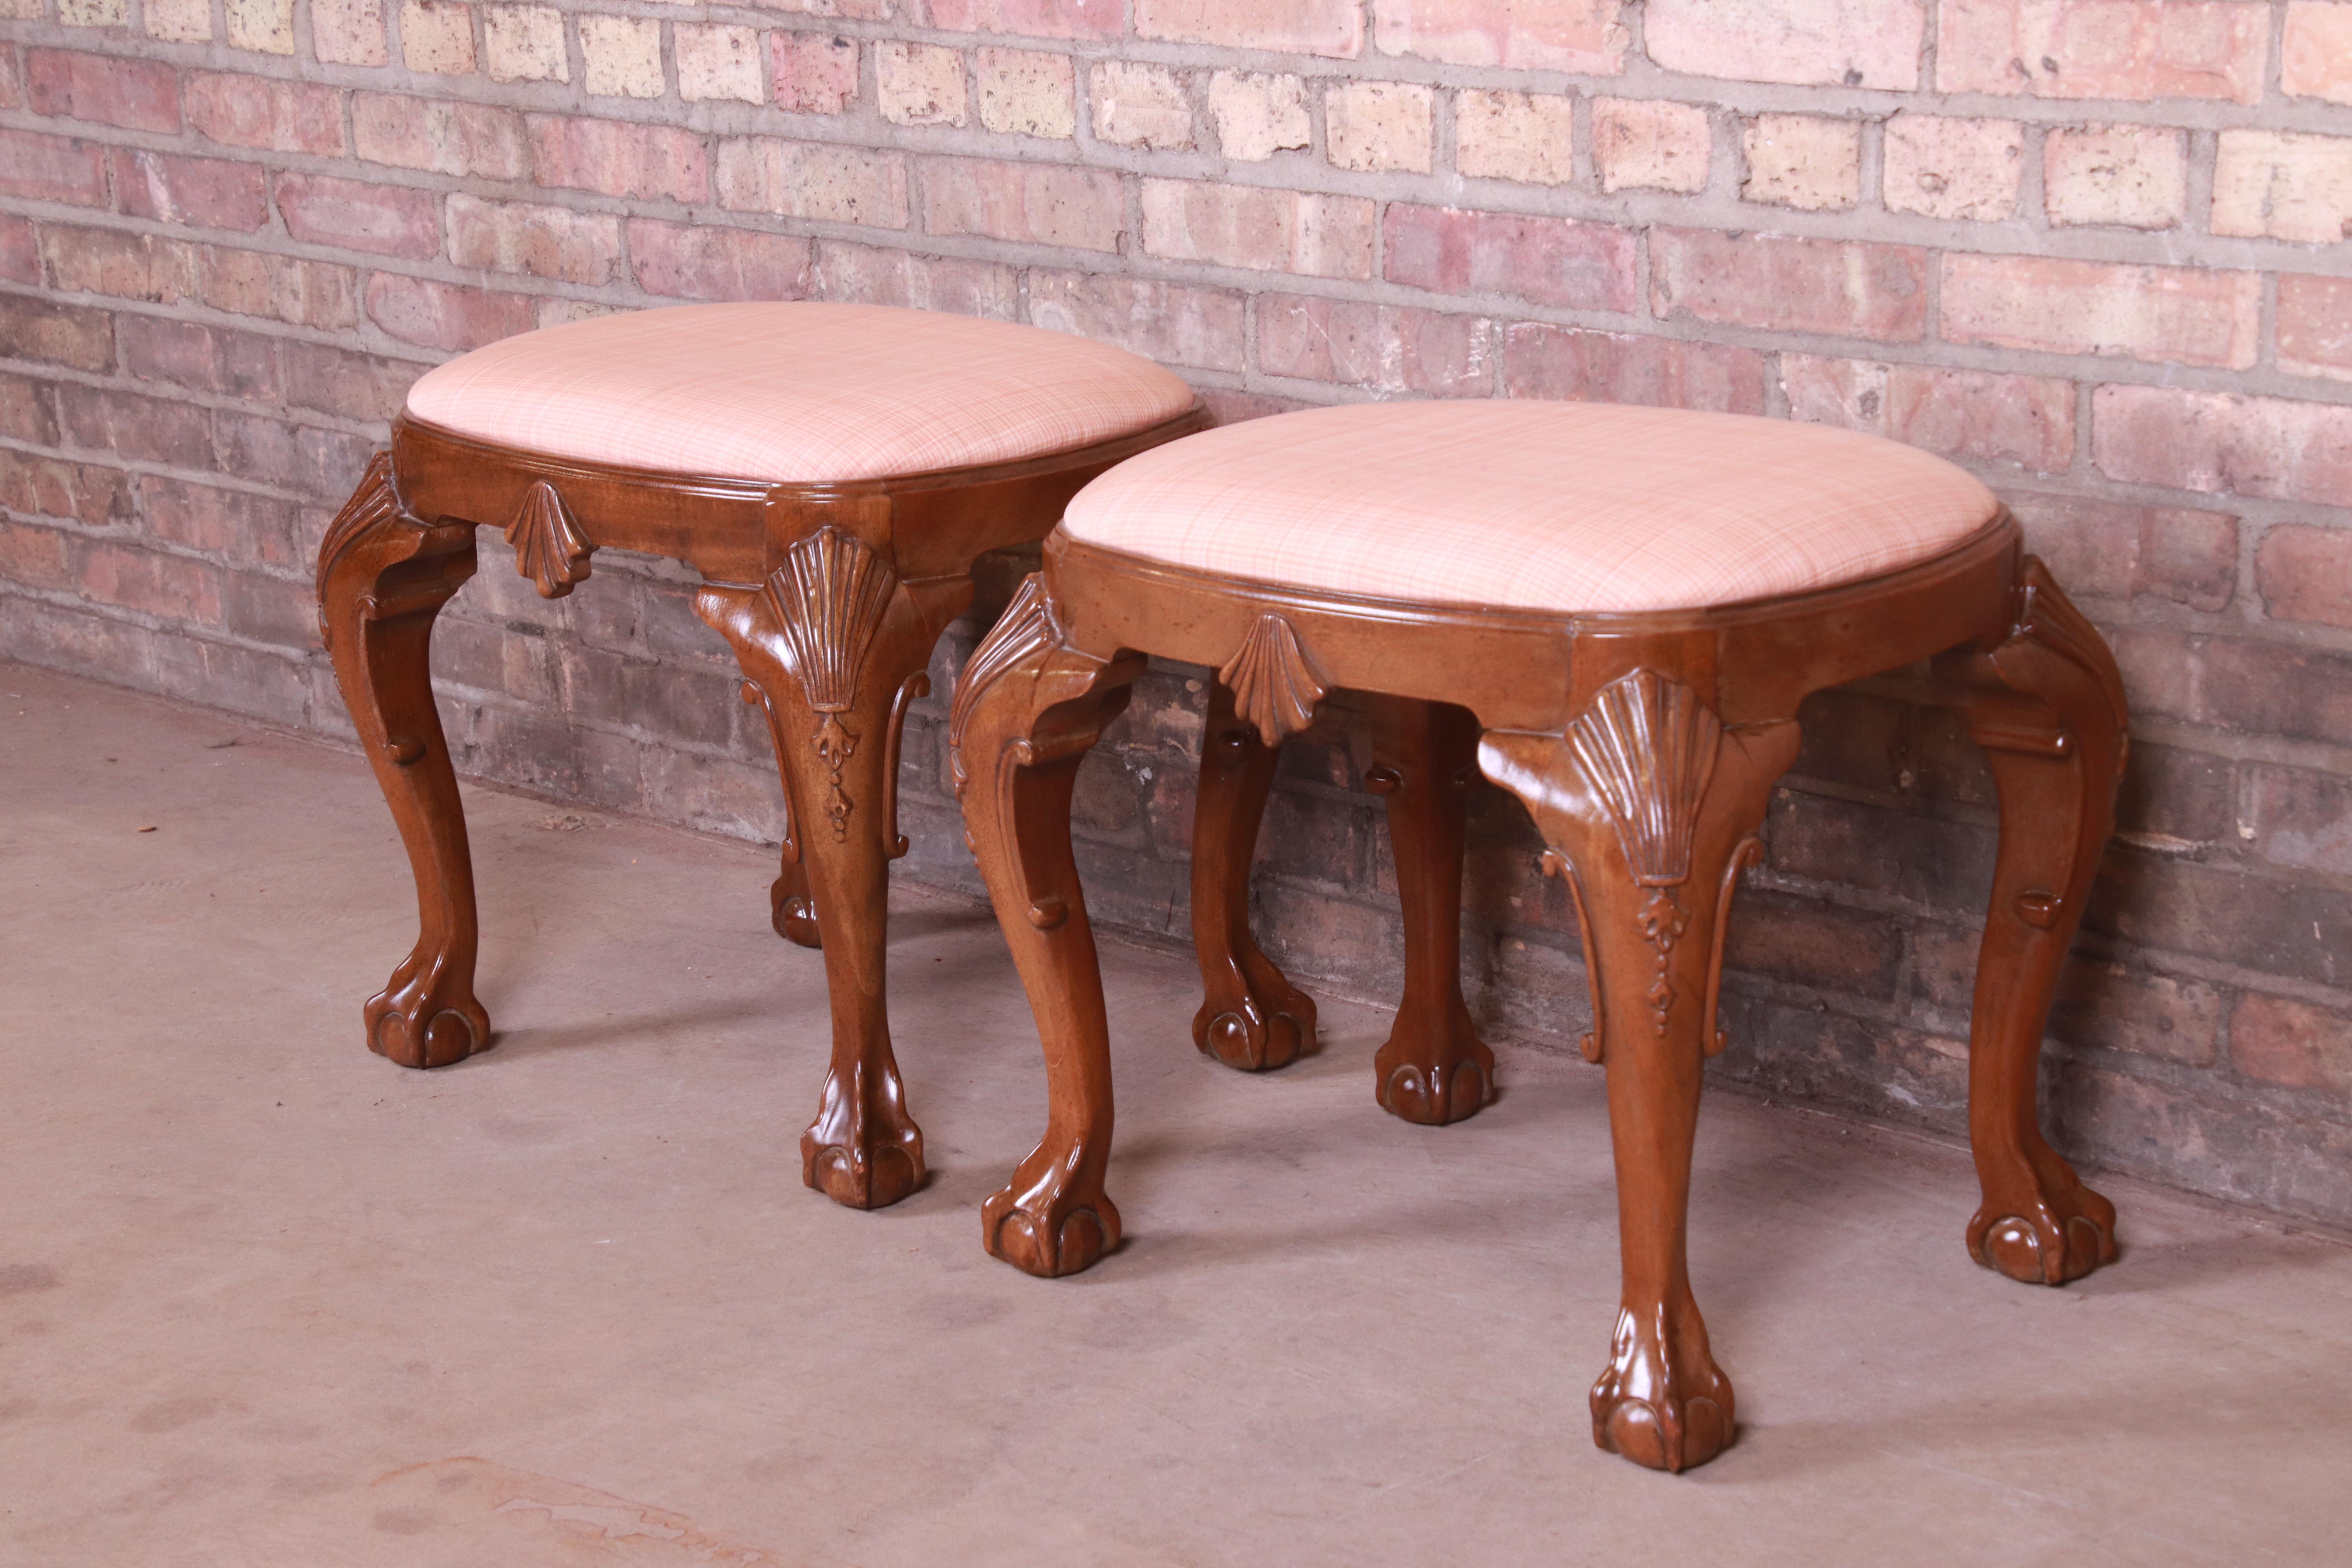 Upholstery Baker Furniture Historic Charleston Chippendale Carved Mahogany Stools, Pair